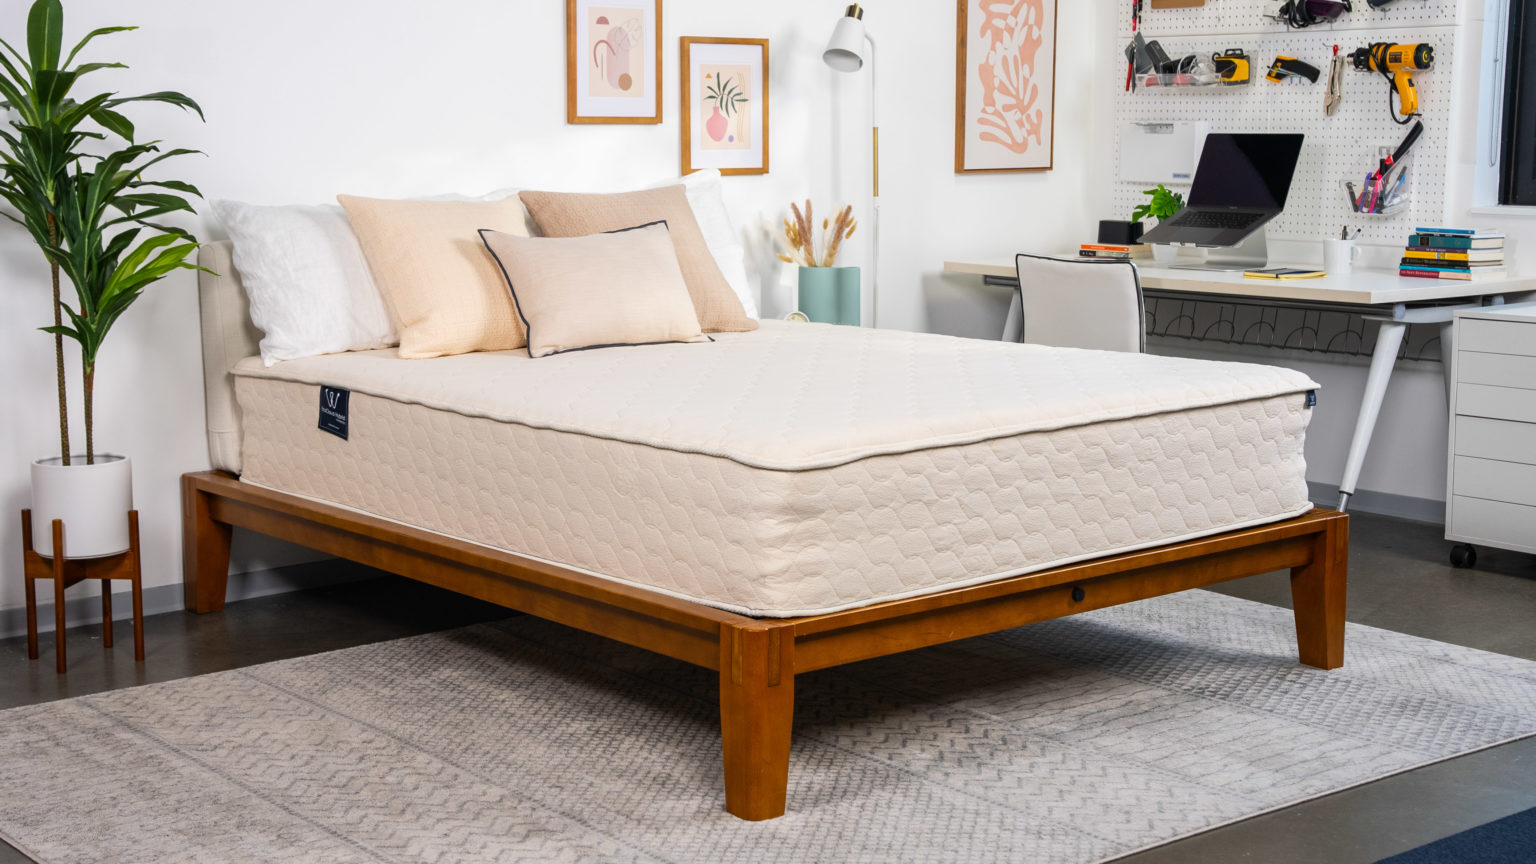 What is the Importance Of Choosing The Right Mattress?